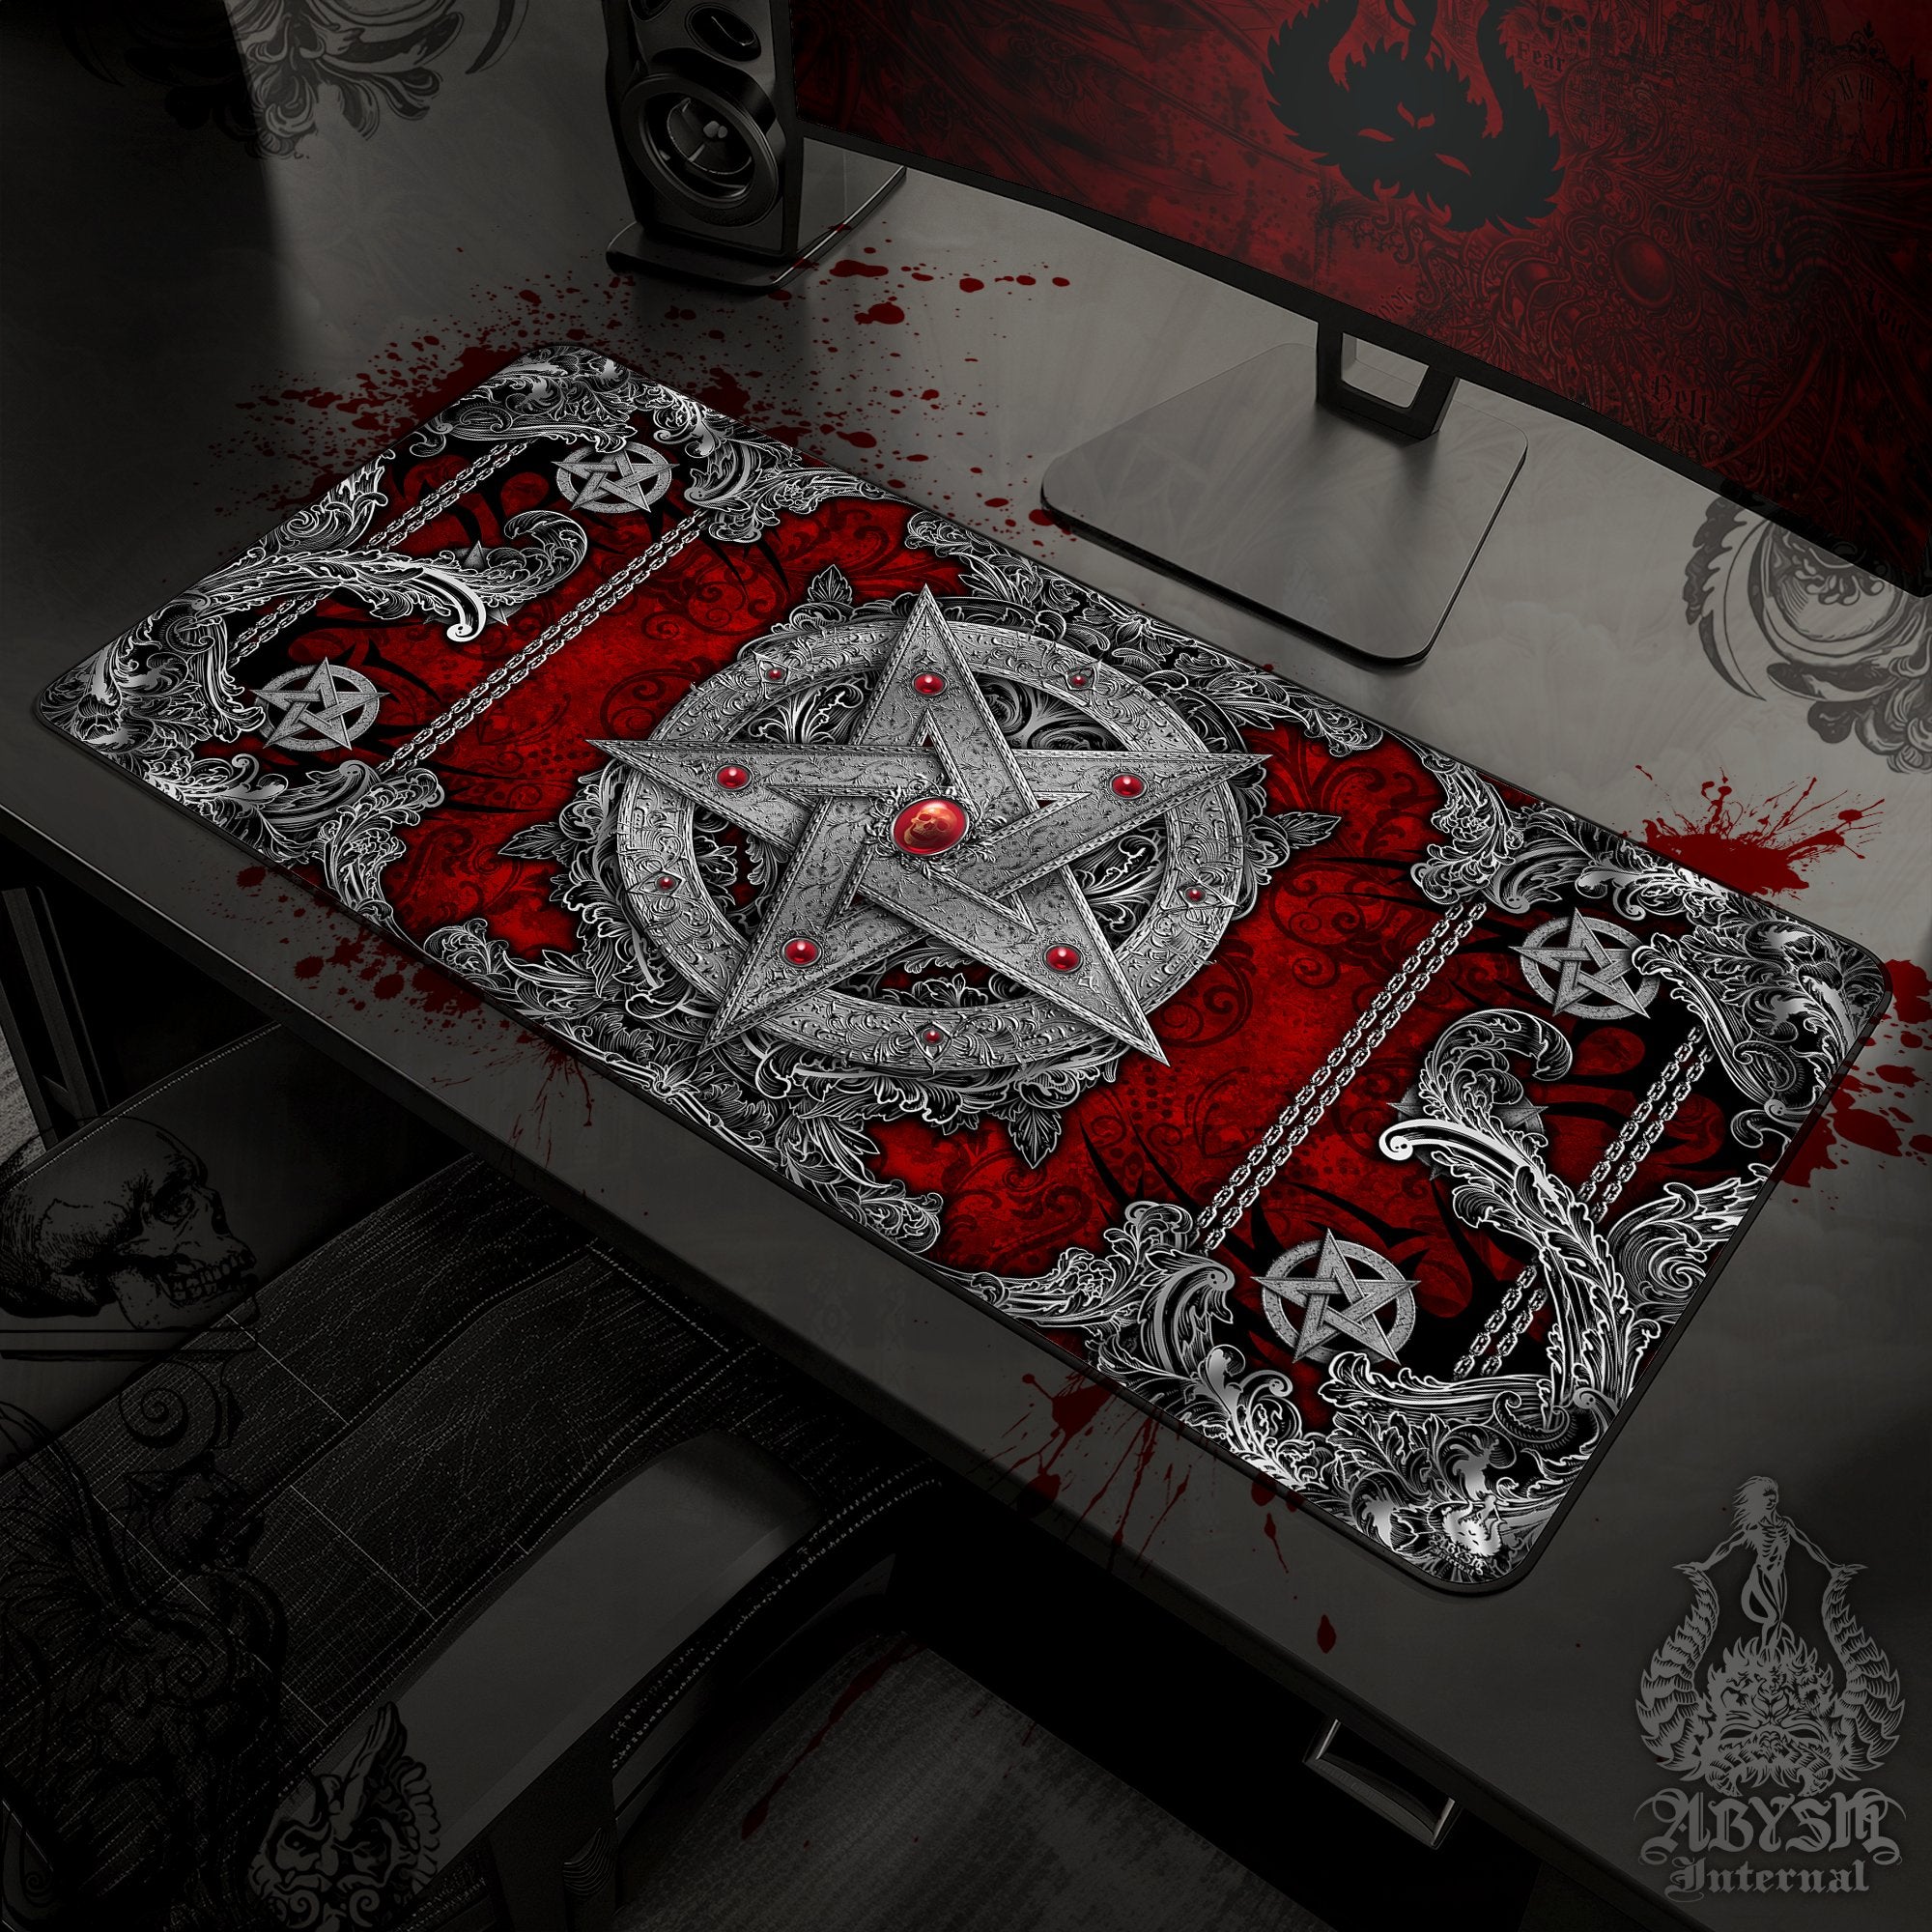 Satanic Gaming Desk Mat, Silver Pentagram Mouse Pad, Gothic Table Protector Cover, Heavy Metal Workpad, Art Print - 4 Options - Abysm Internal